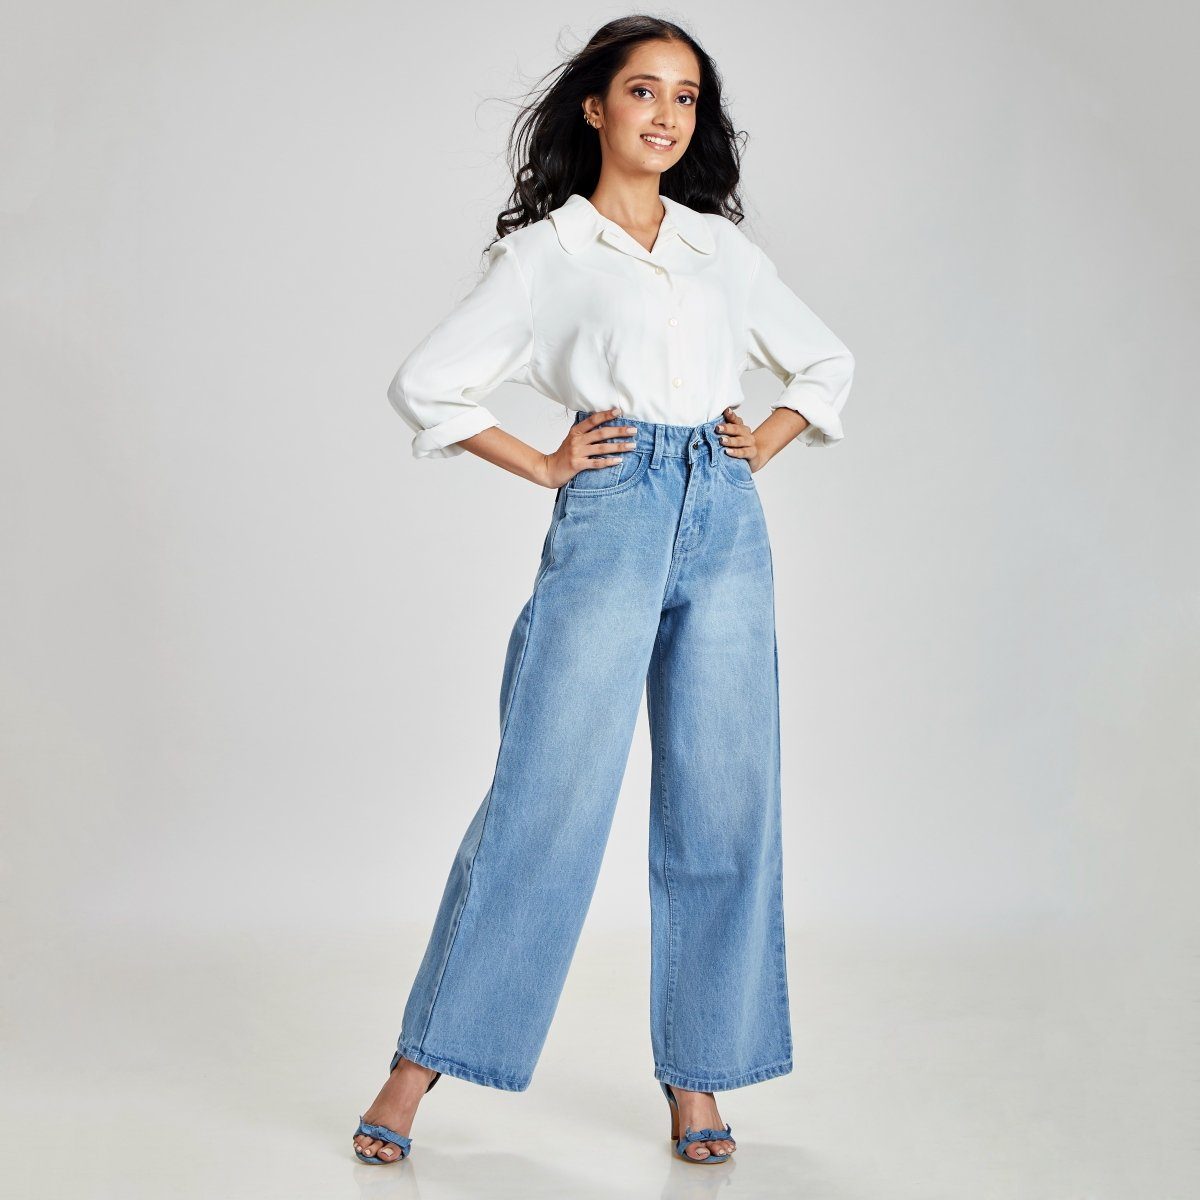 Wide leg jeans-9 Types of Jeans for your Body Shape-by live love laugh